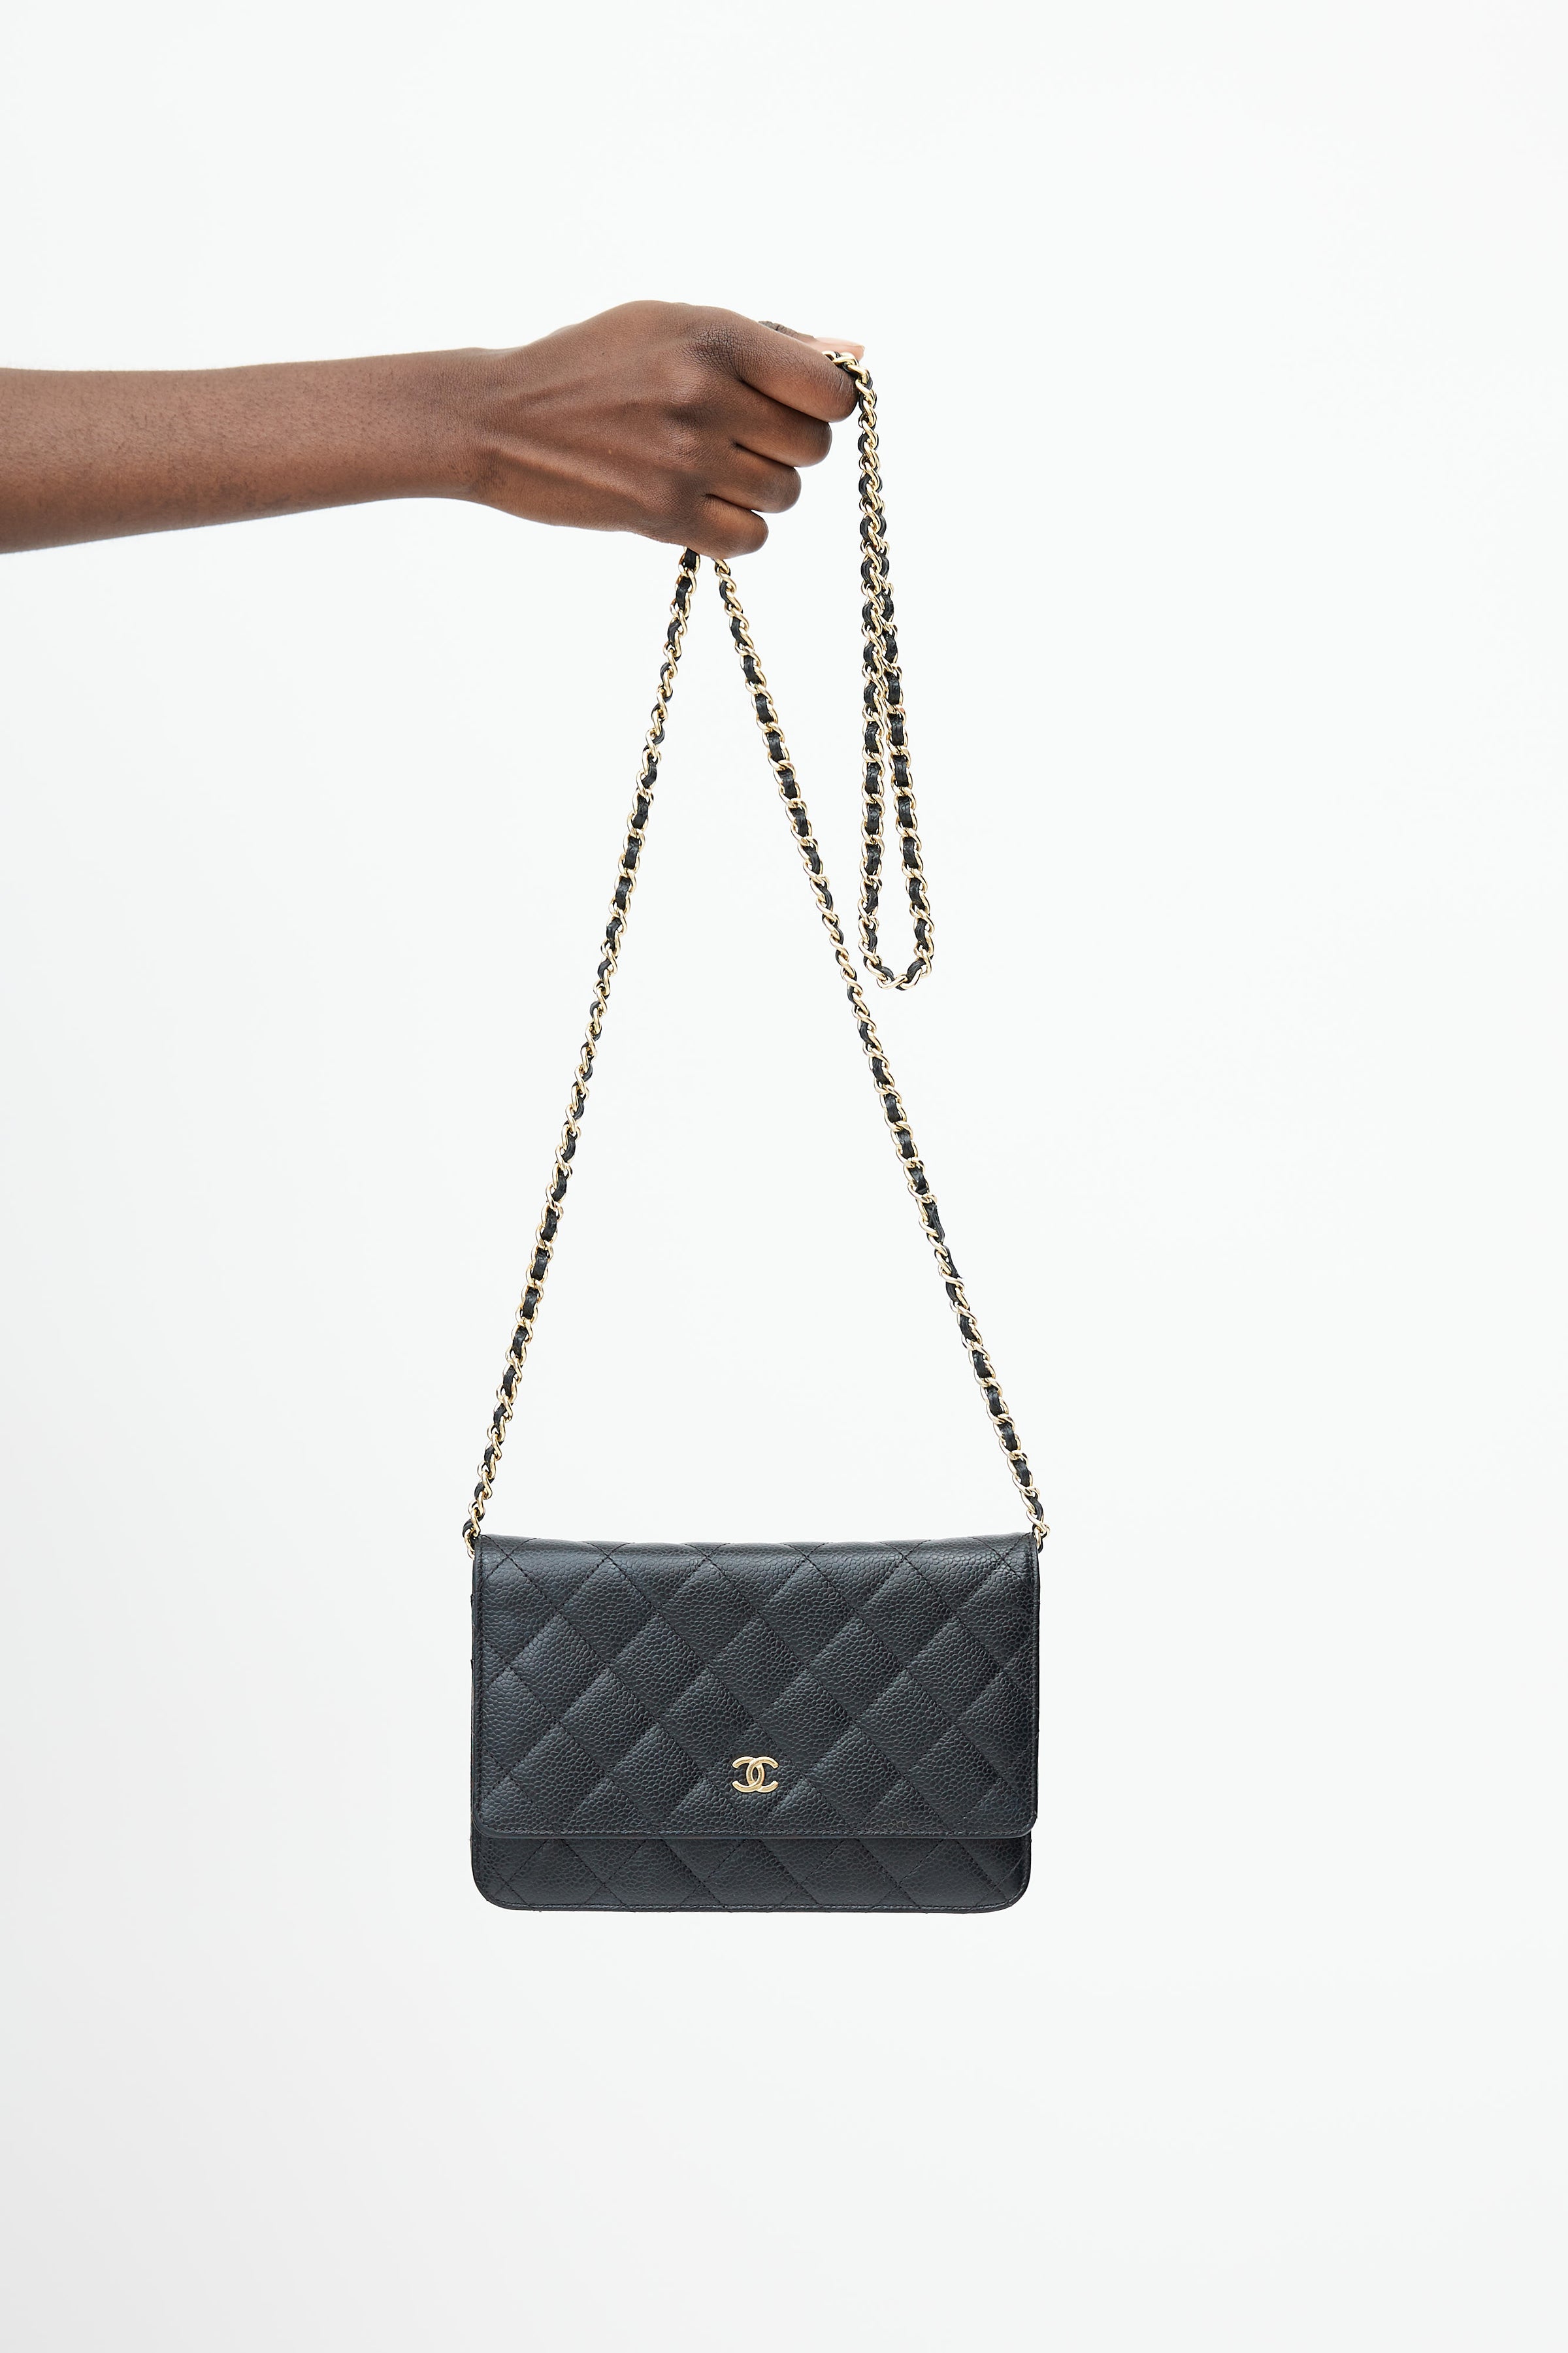 Chanel Black Caviar Quilted Wallet On Chain Silver Hardware